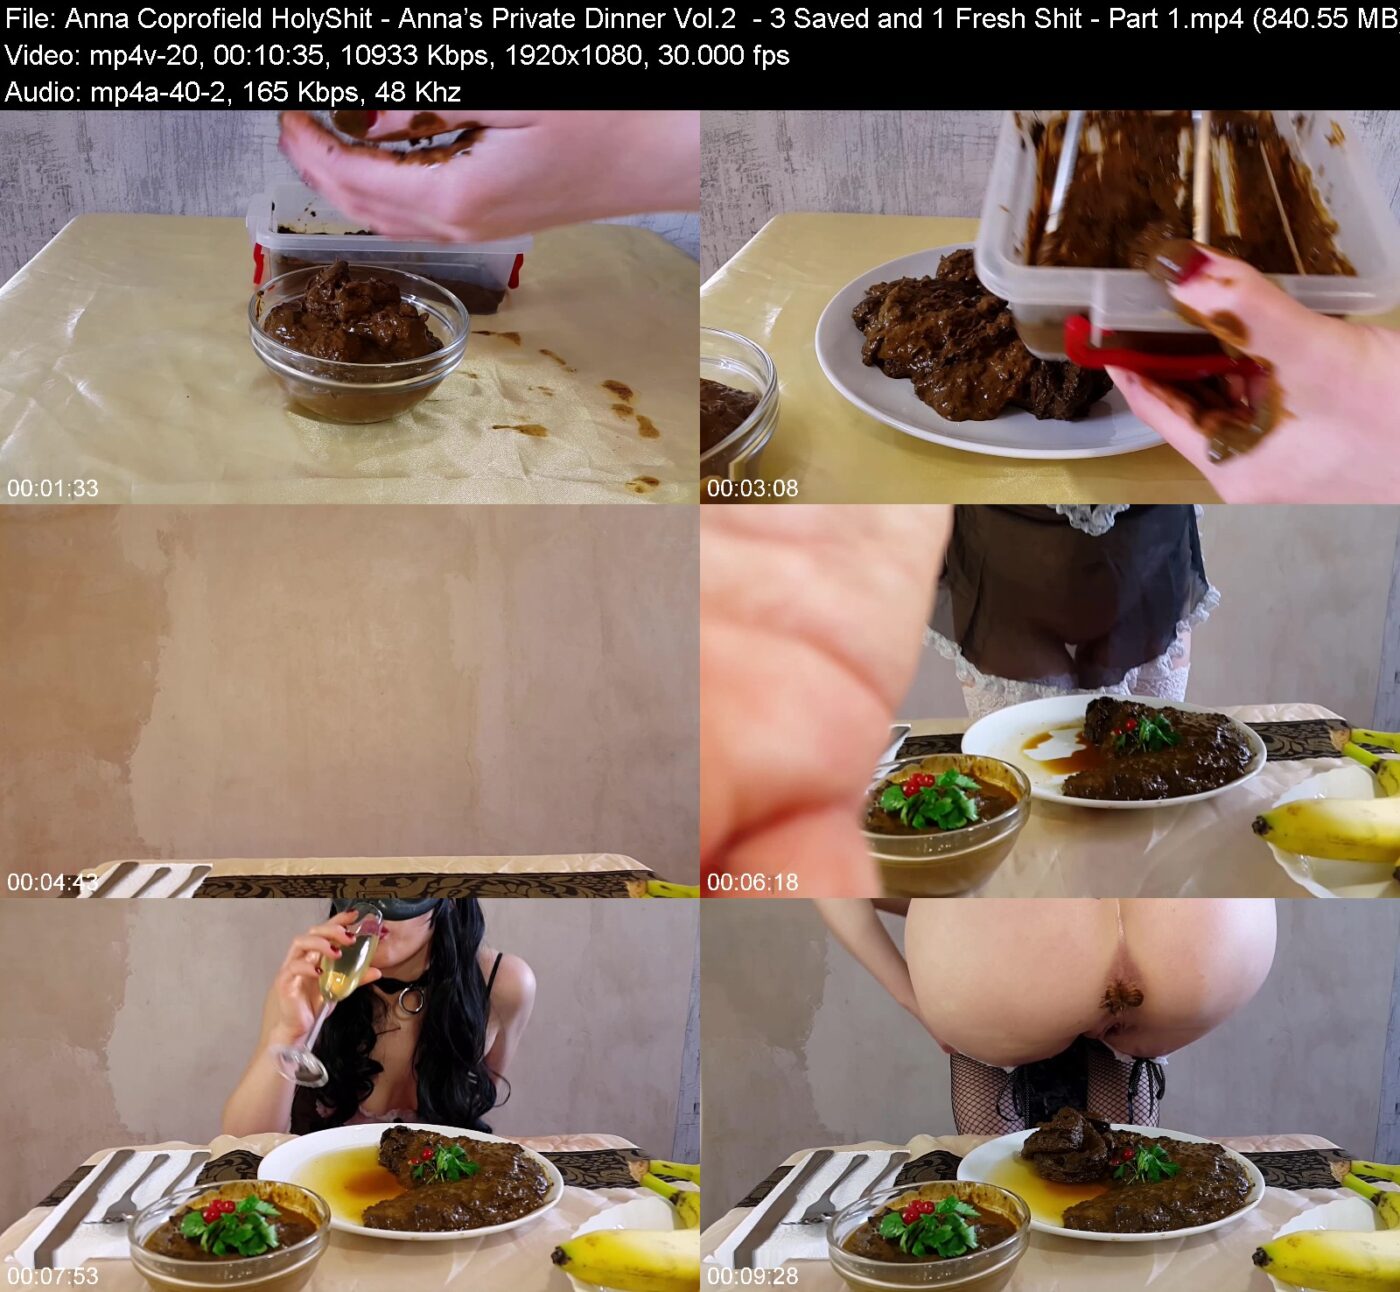 Anna Coprofield HolyShit in Anna's Private Dinner Vol.2  in 3 Saved & 1 Fresh Shit in Part 1